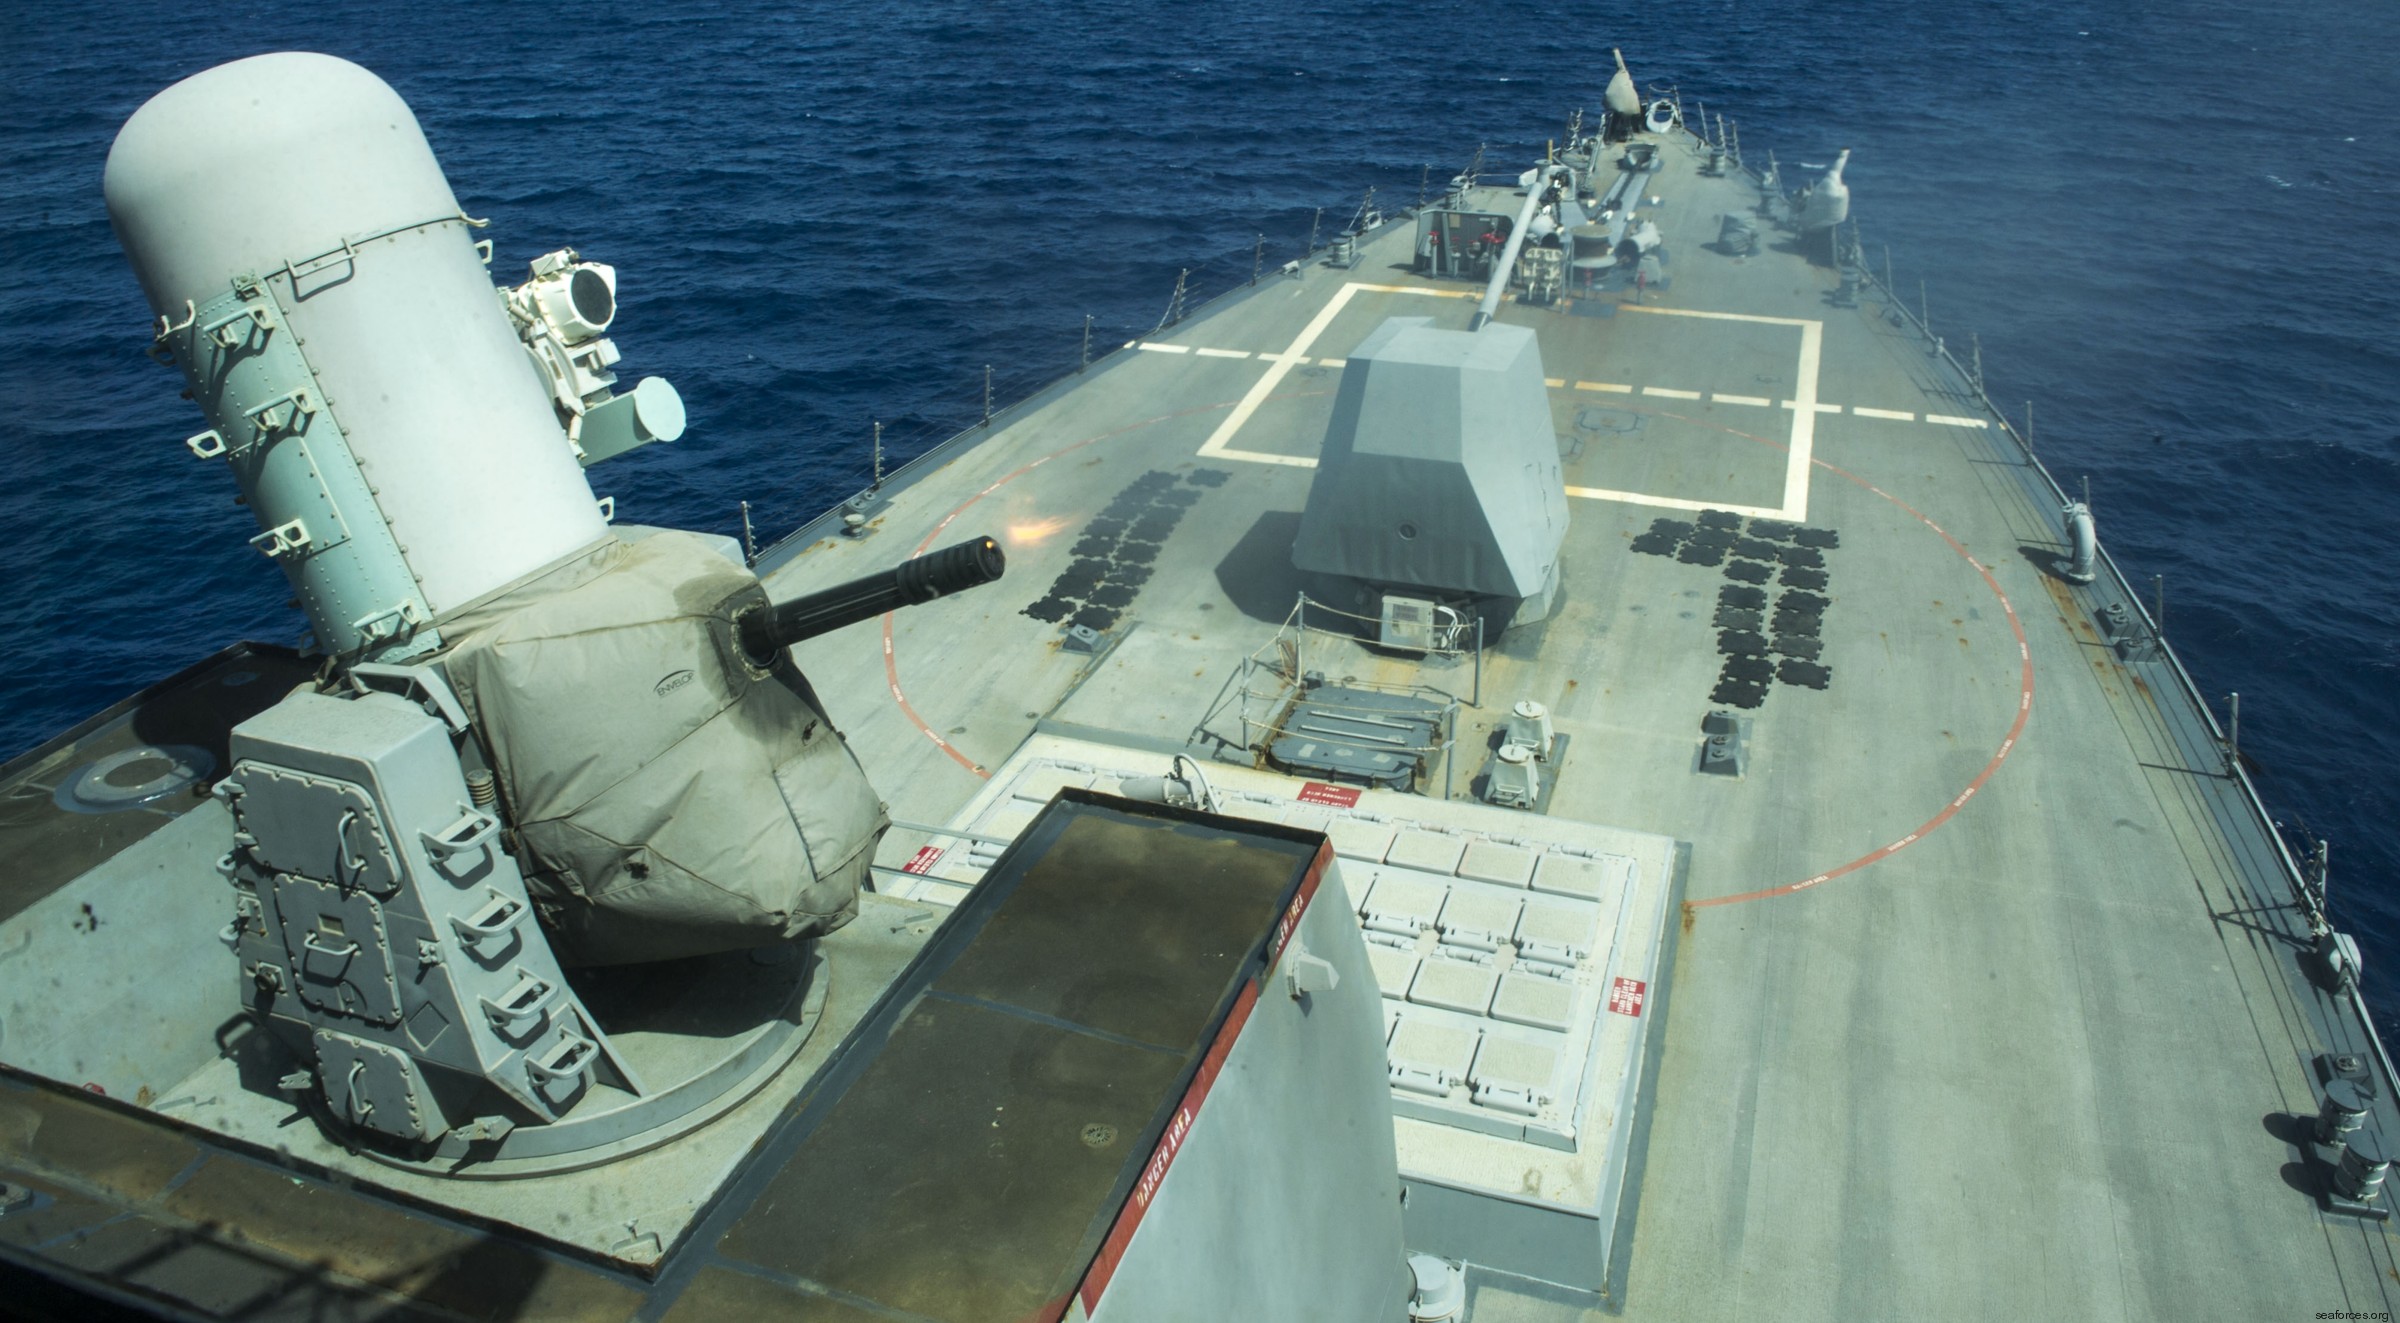 ddg-80 uss roosevelt guided missile destroyer arleigh burke class us navy 38 mk. 15 phalanx close in weapon system ciws